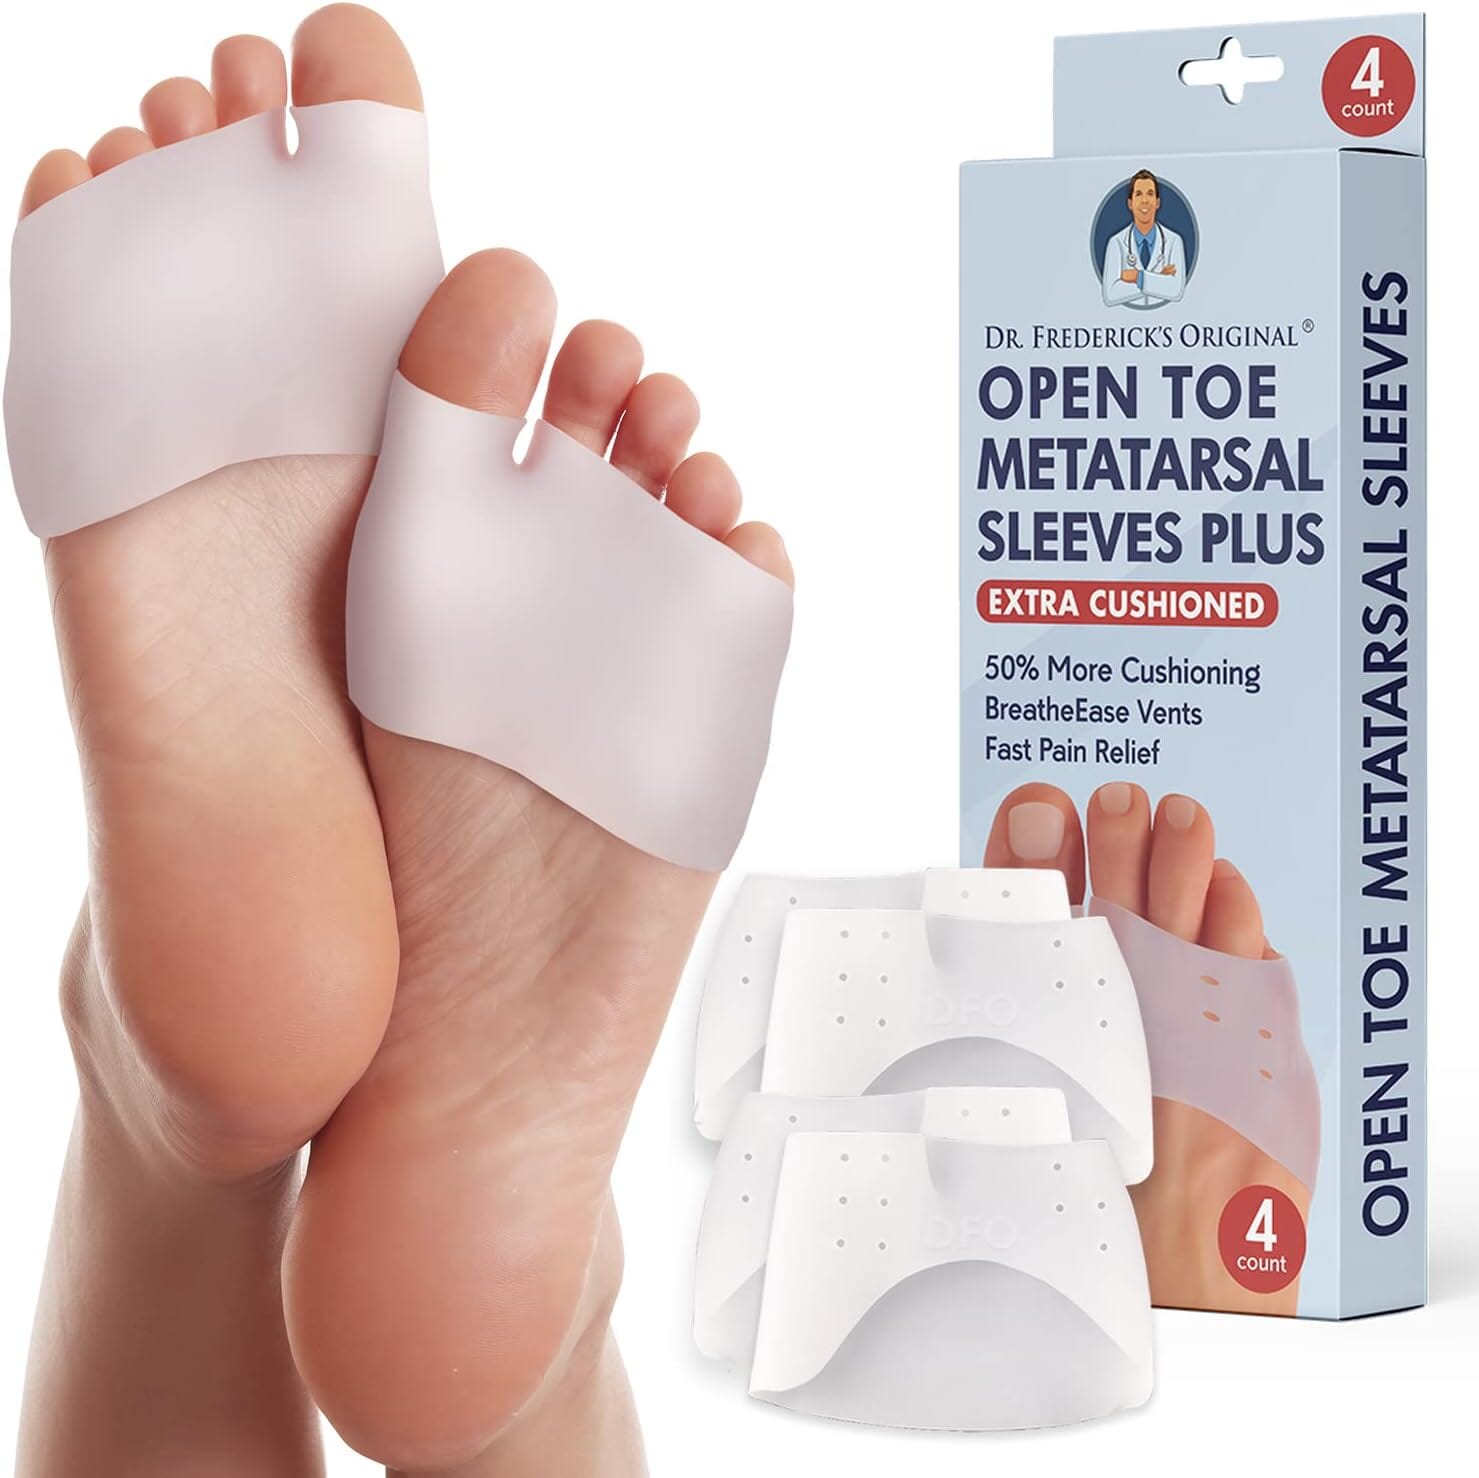 Dr. Frederick's Original Metatarsal Sleeves Plus - 50% More Cushioning - 4 Pieces - Metatarsal Pads for Women & Men Foot Pain Dr. Frederick's Original 